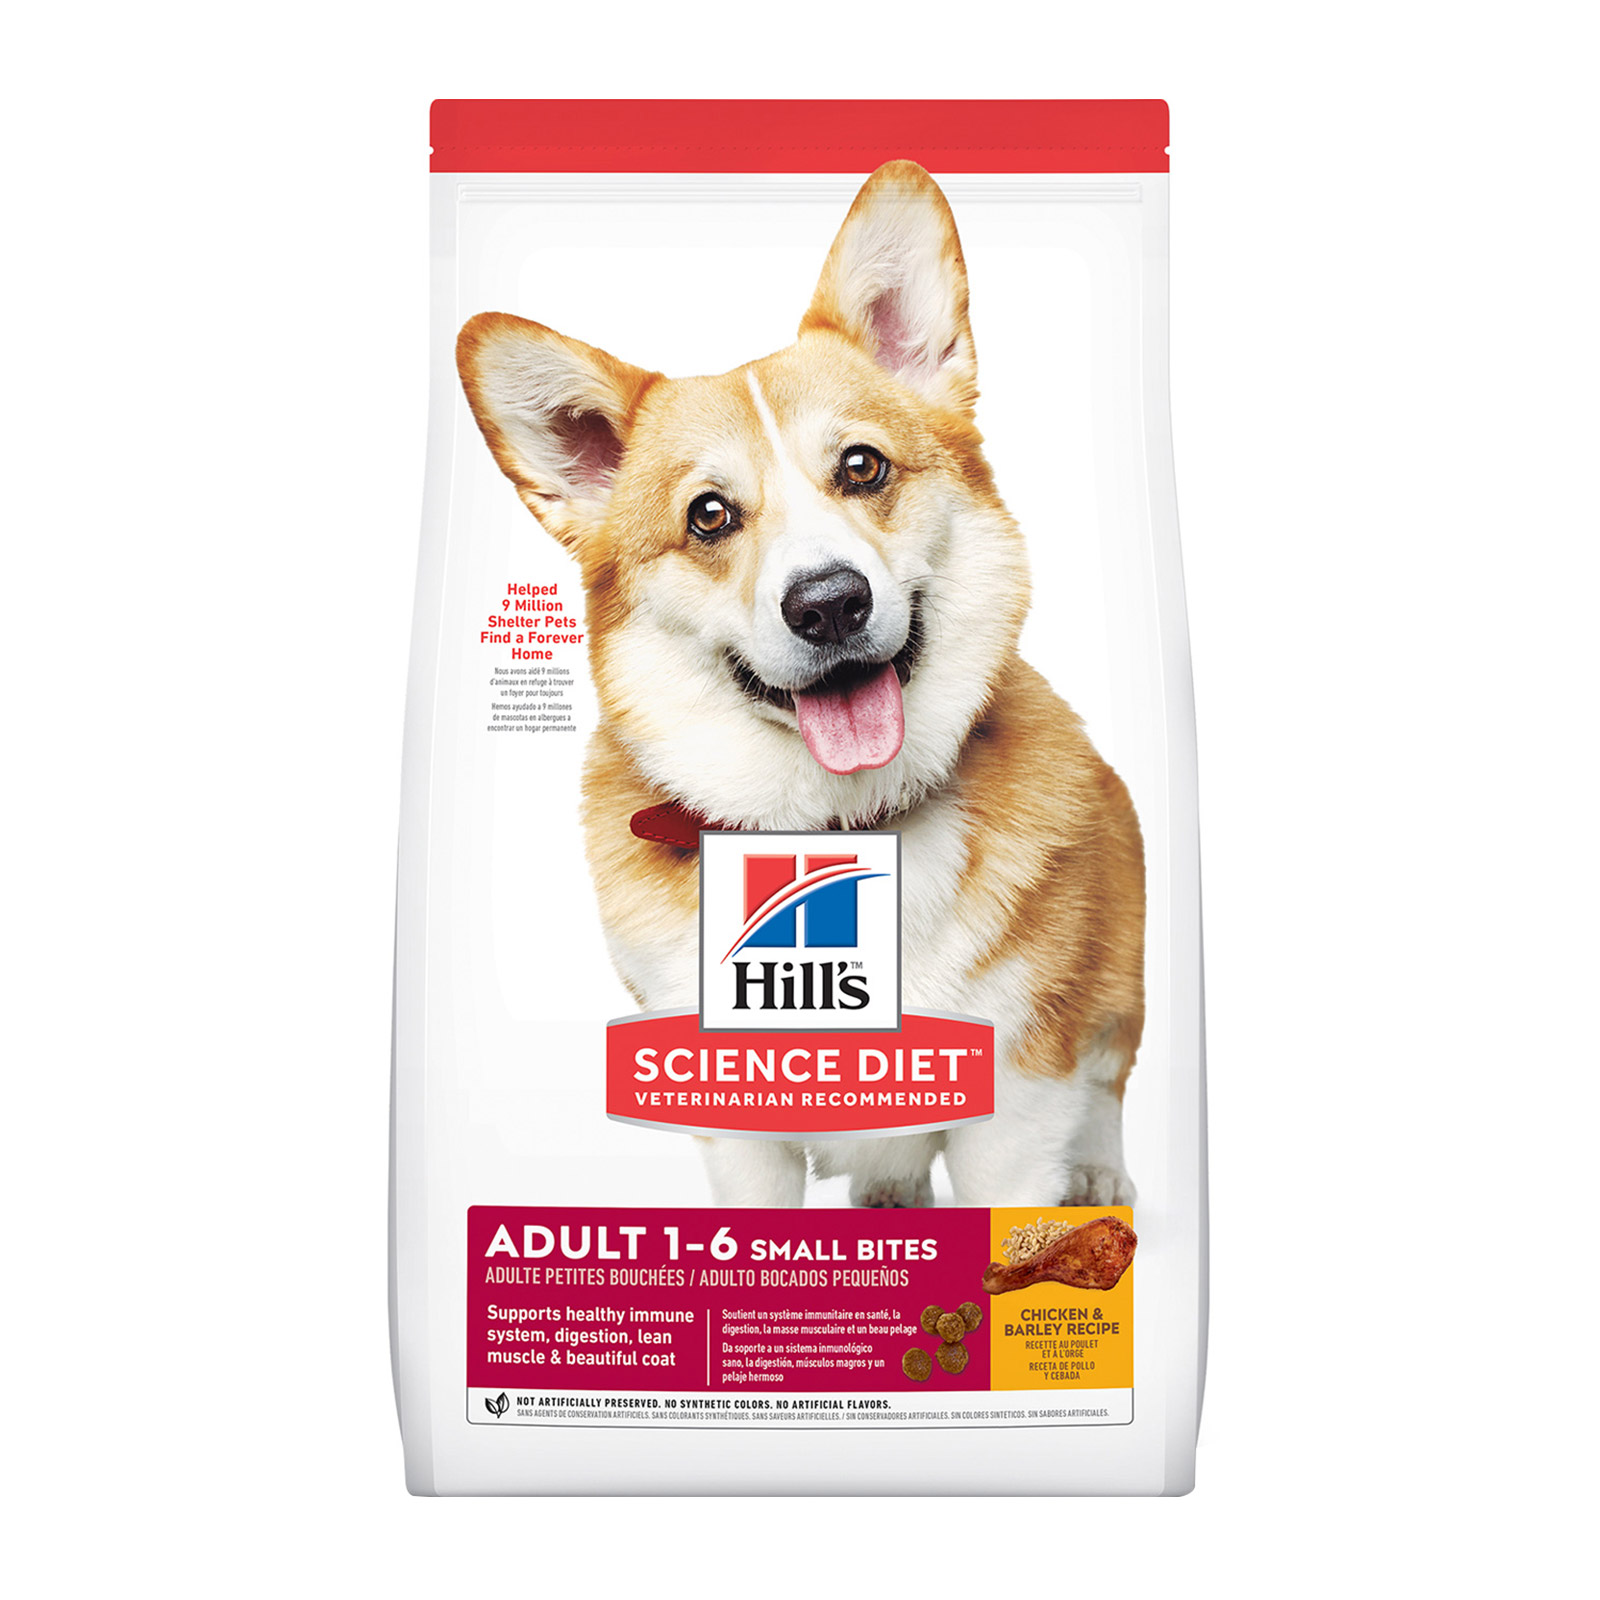 Hill's Science Diet Adult Small Bites Dry Dog Food for Food